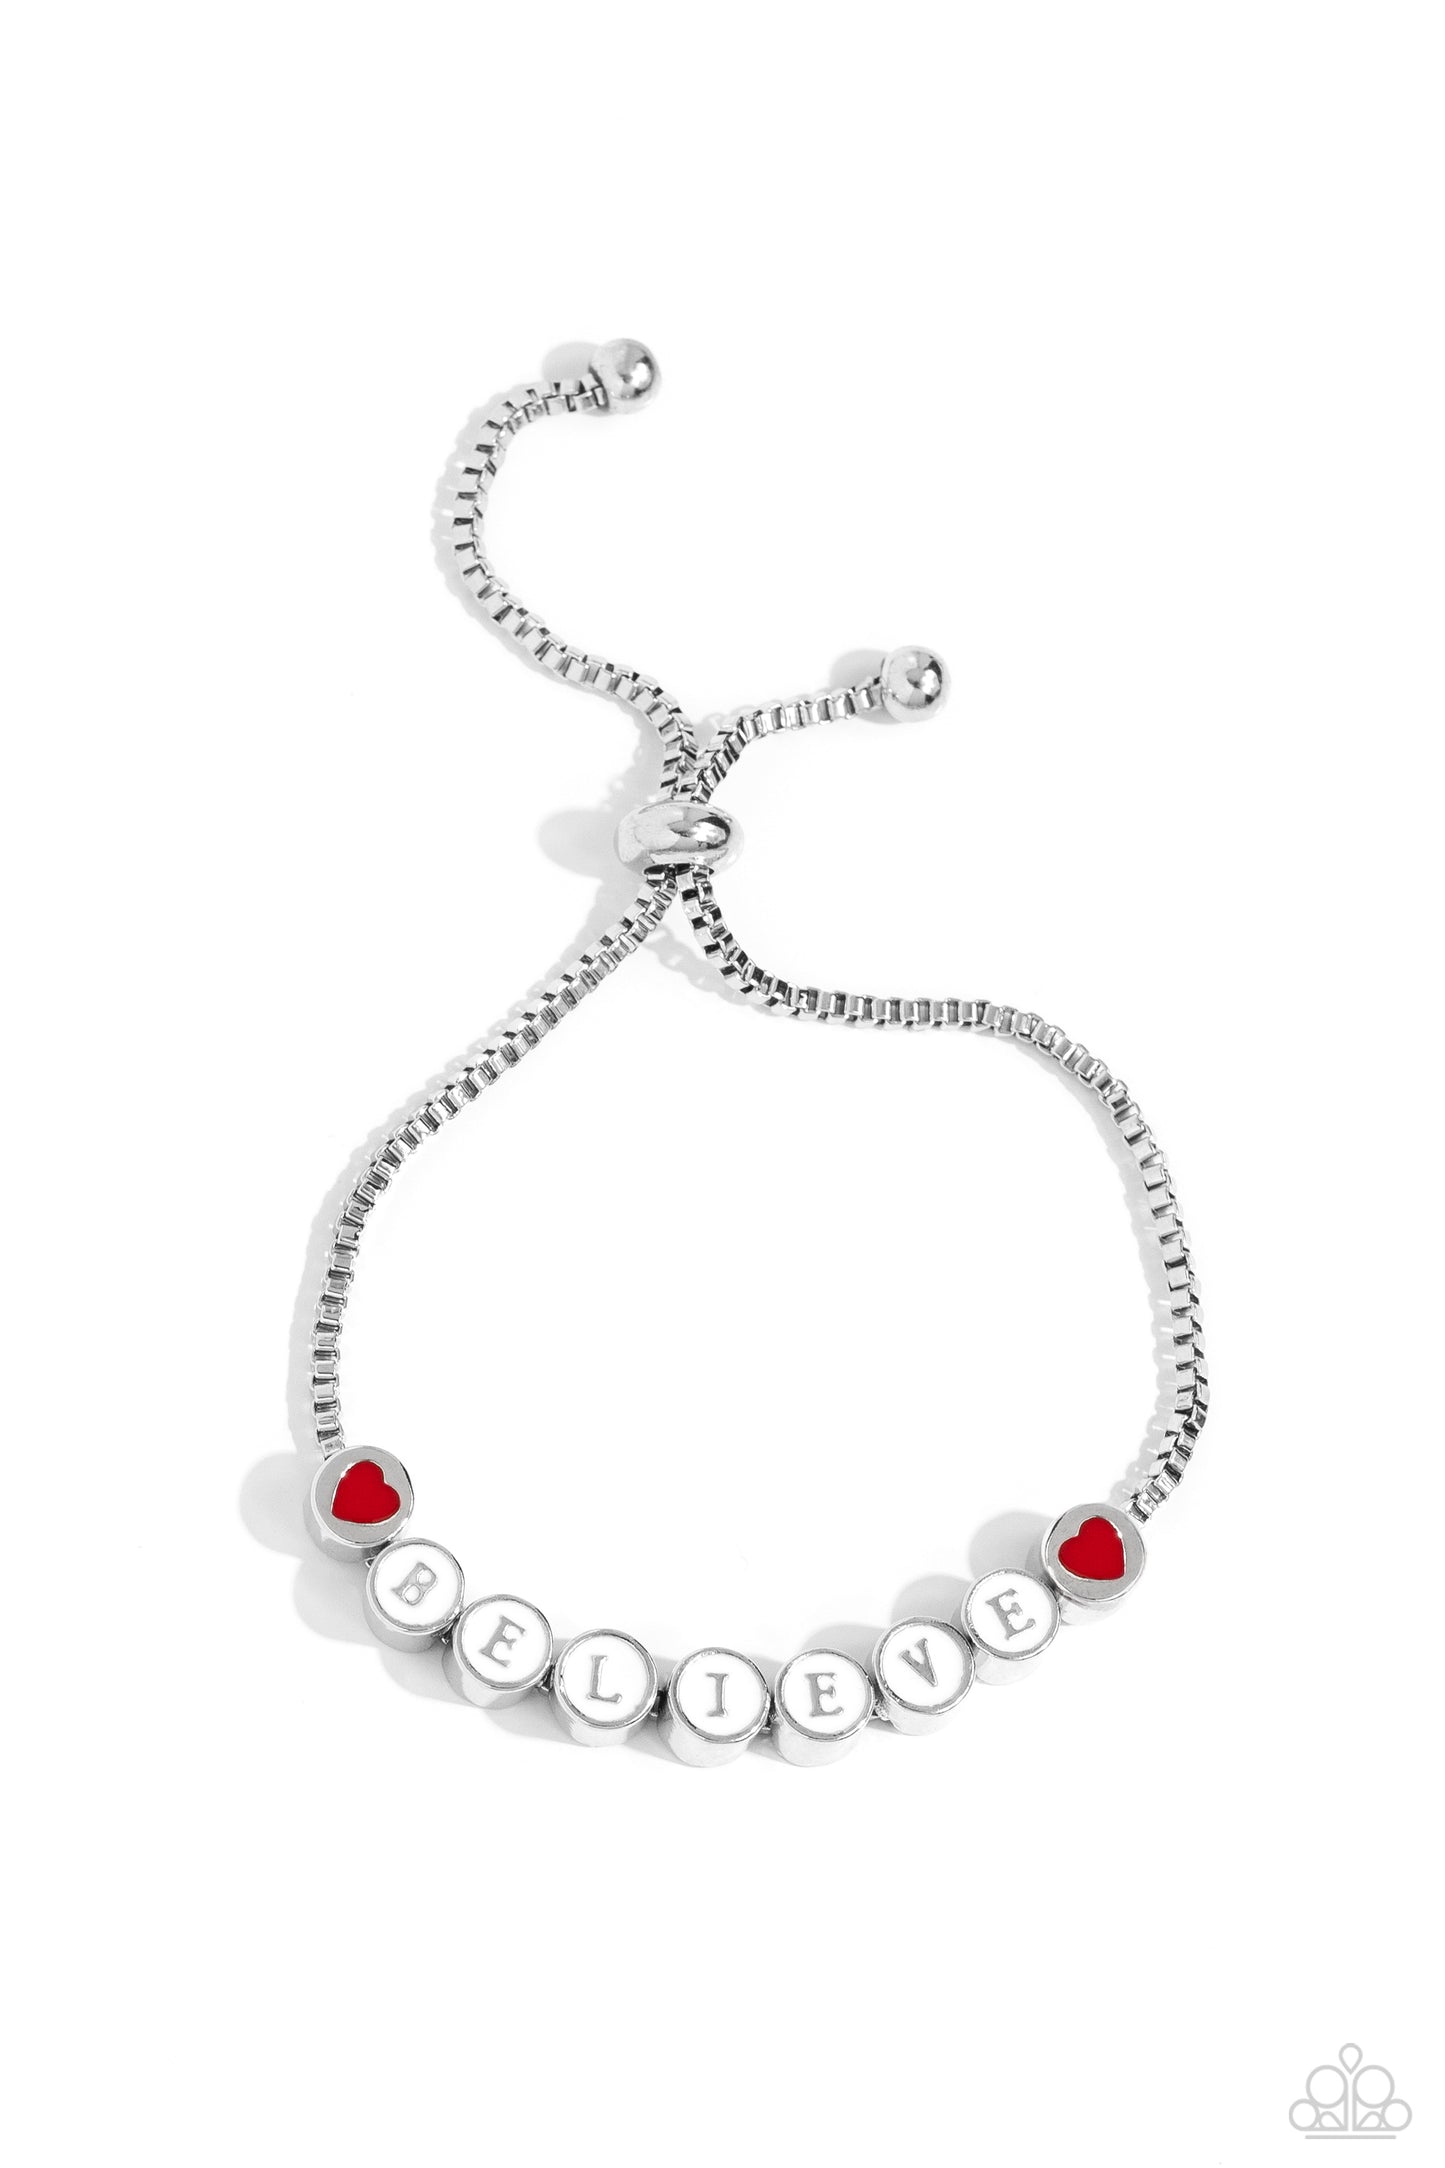 I Cant Believe It! White Sliding Bead Bracelet - Paparazzi Accessories  Delicately attached to a dainty silver box chain, thick circular silver fittings spell out the word "BELIEVE" across a white-painted backdrop with red-painted hearts embellishing the ends of the word, creating a sleek inspiring display. Features an adjustable sliding bead closure.  Sold as one individual bracelet.  Sku:  P9WD-WTXX-141XX